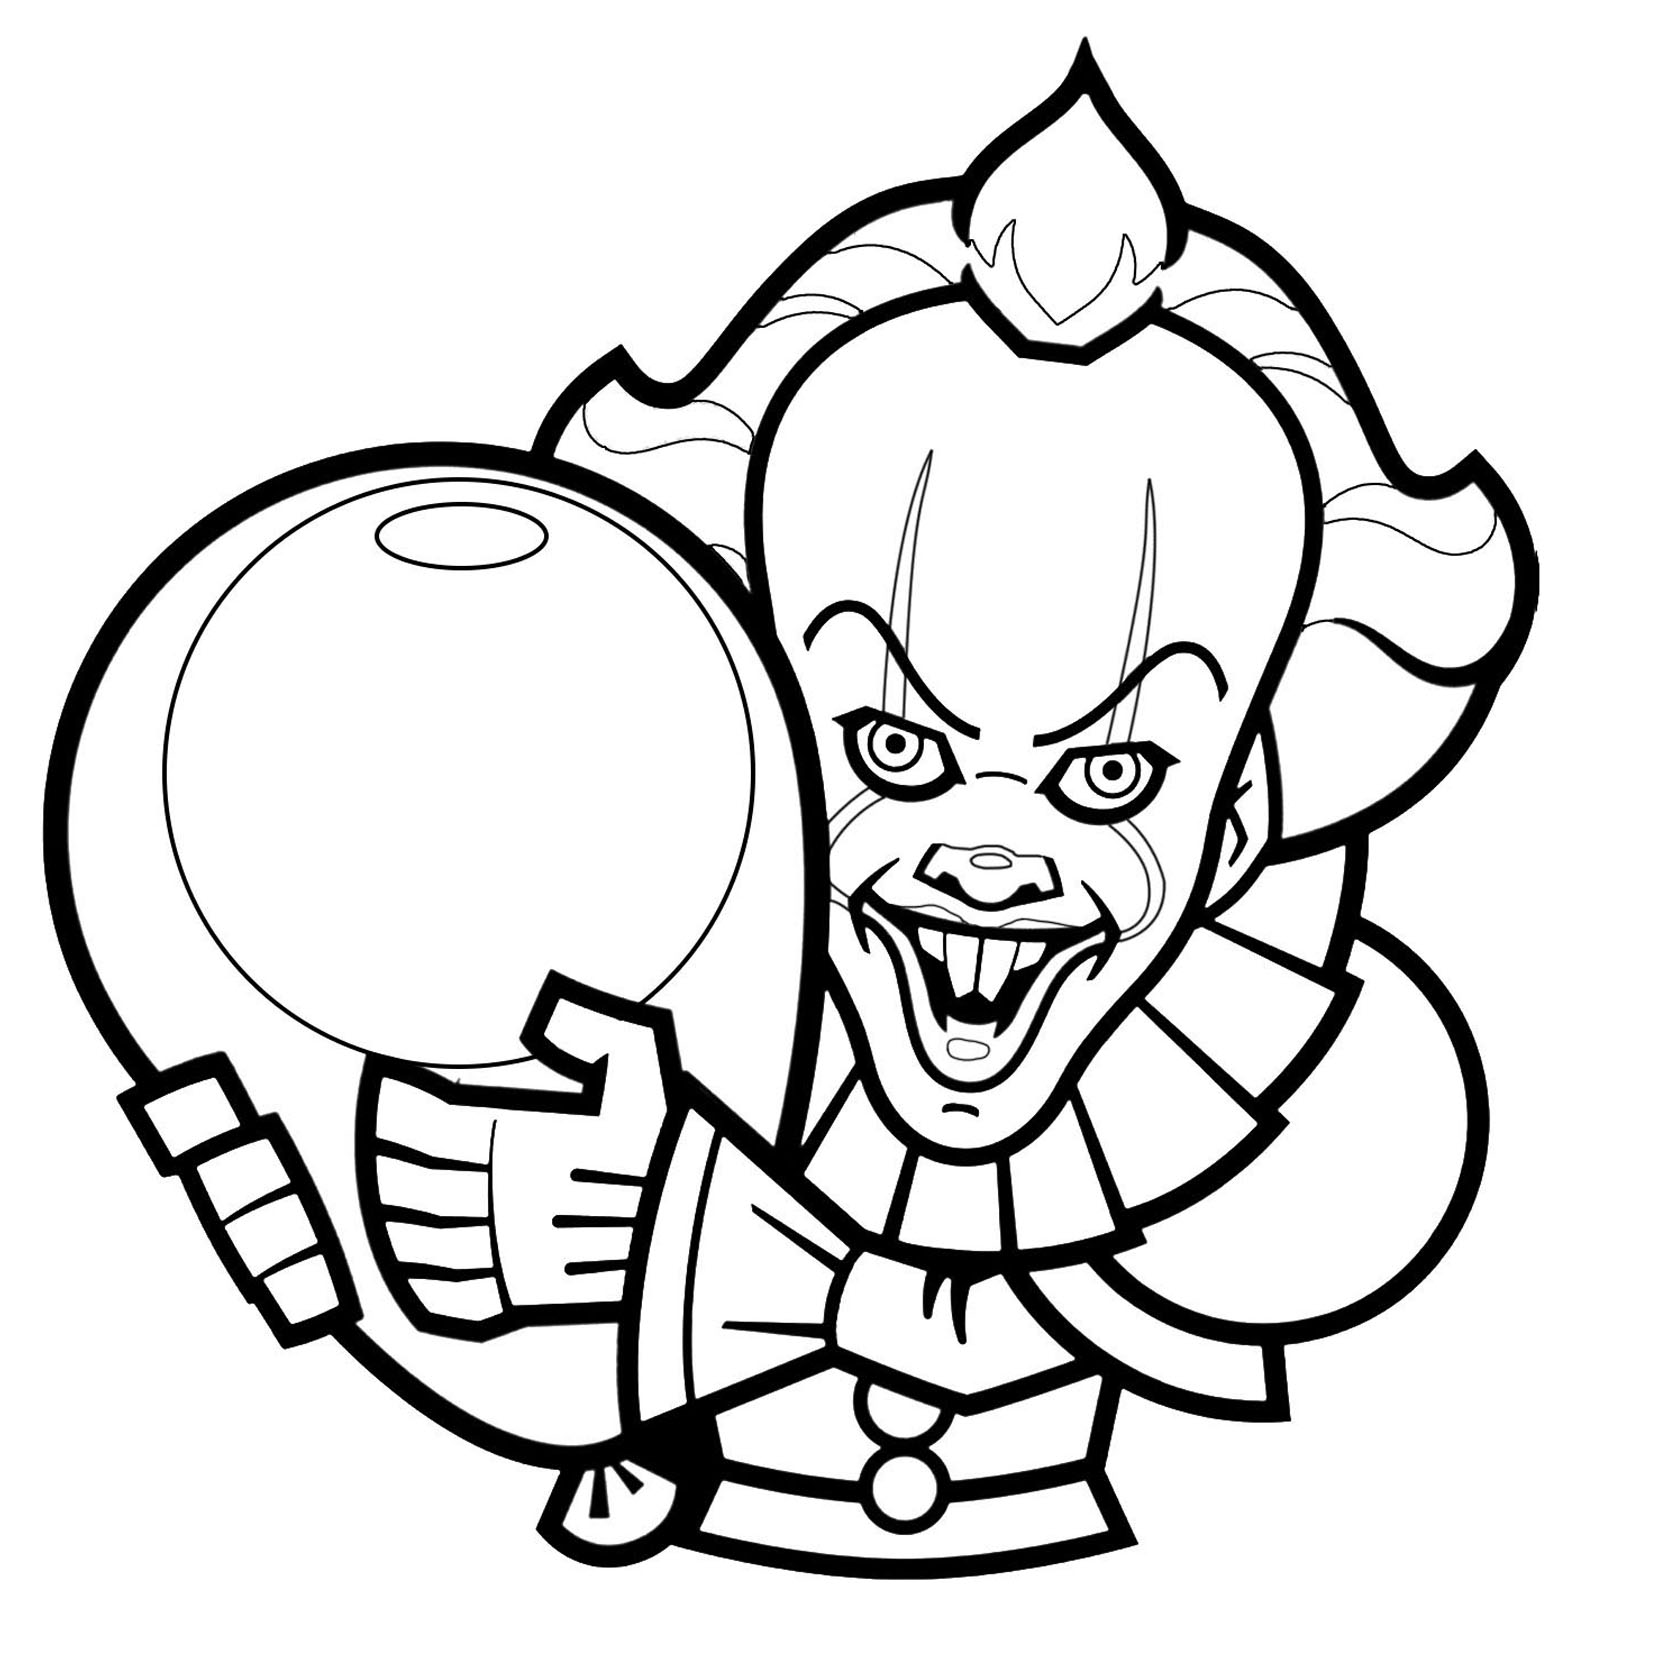 Clown of It version 1 Halloween Kids Coloring Pages